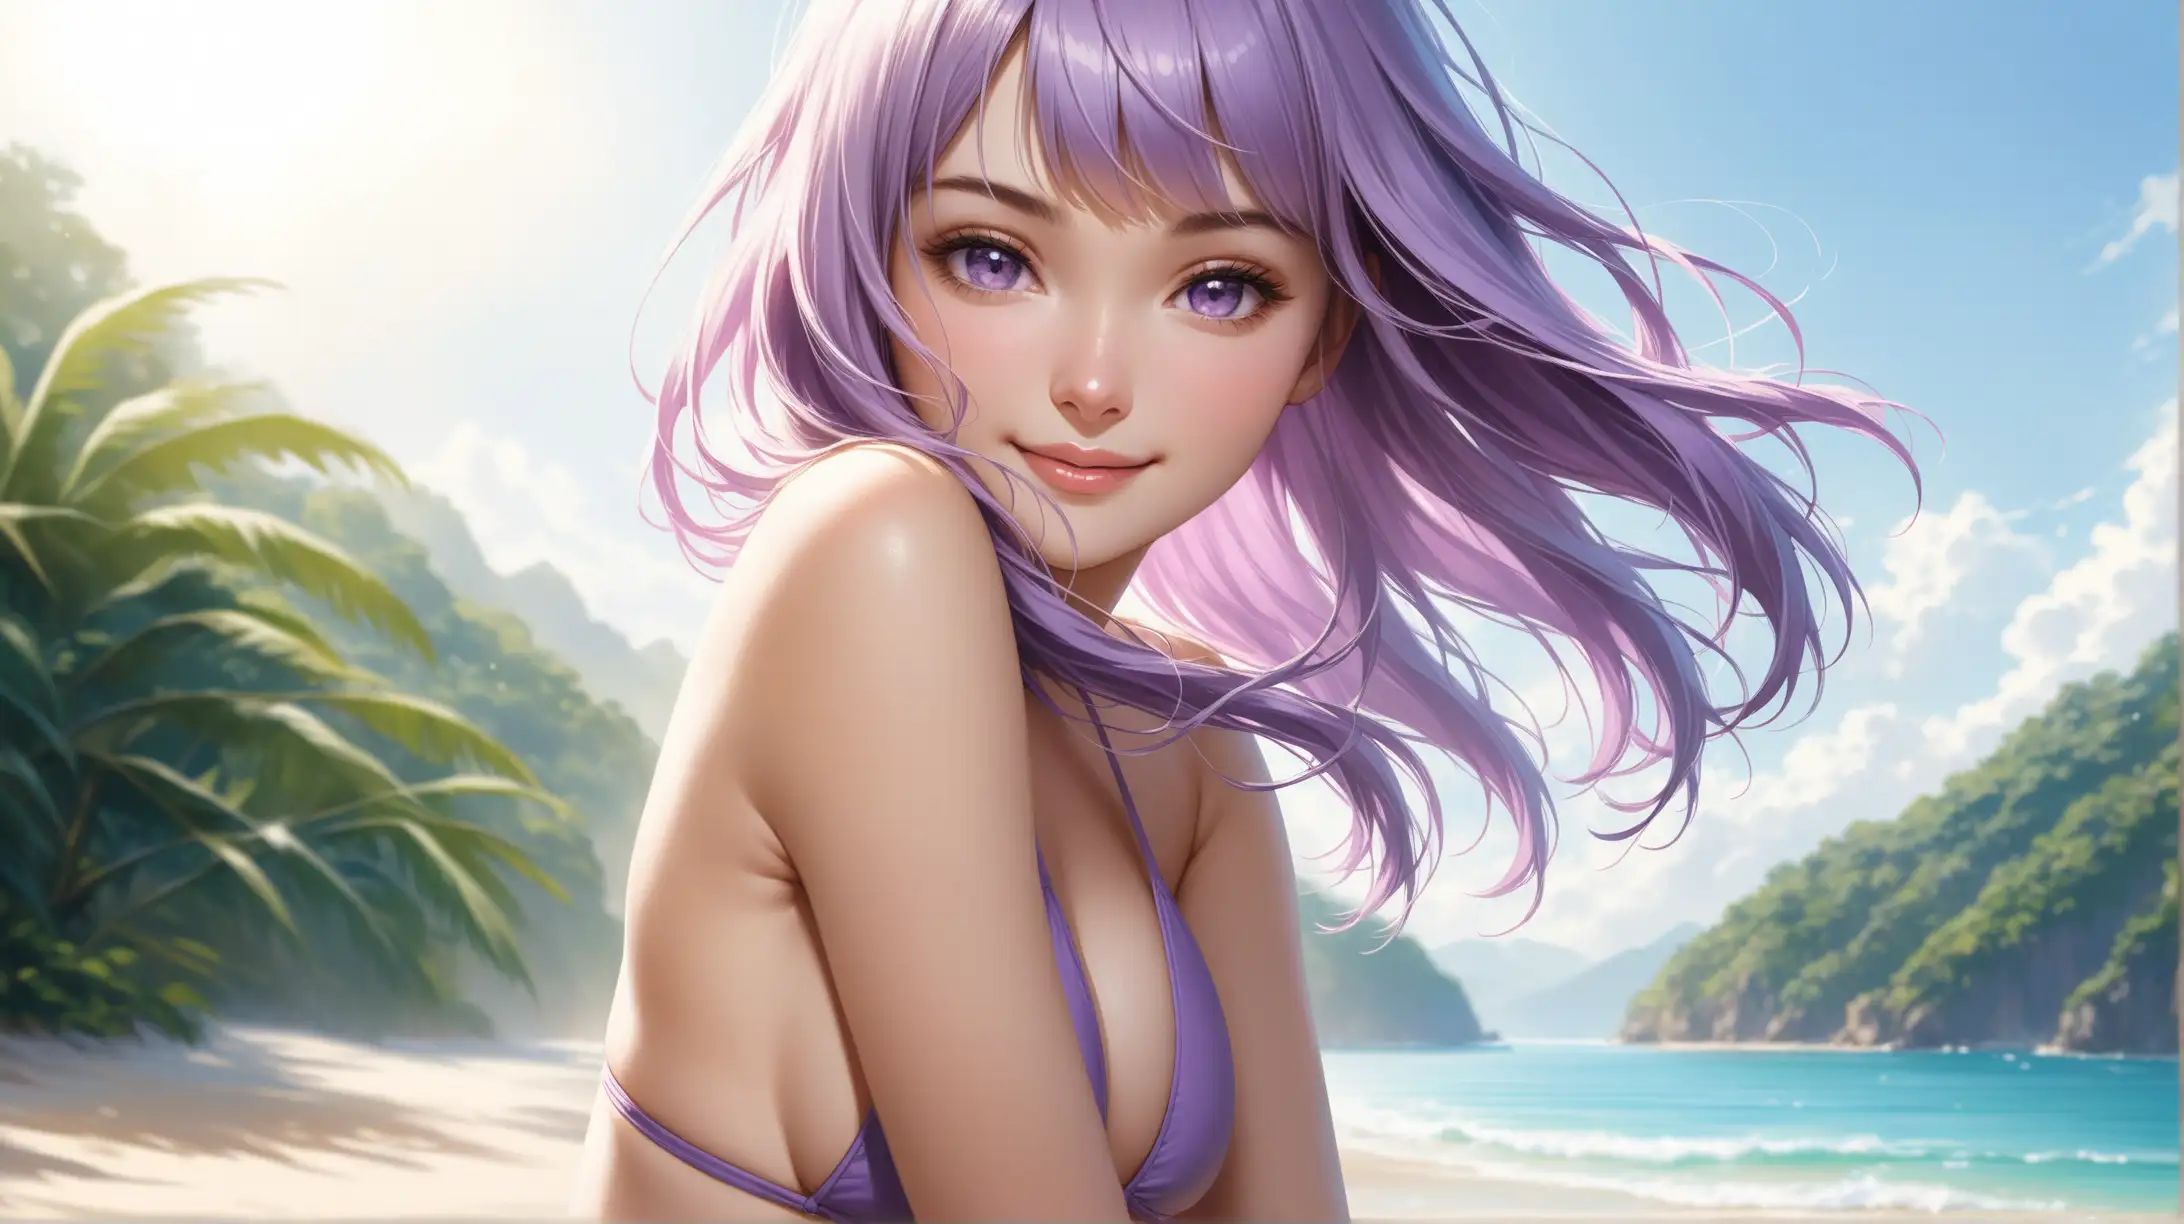 Draw a woman, shoulder length light purple hair, messy bangs framing her face, light purple eyes, petite figure, high quality, realistic, accurate, detailed, long shot, outdoors, full body, natural lighting, seductive pose, swimsuit, smiling at the viewer